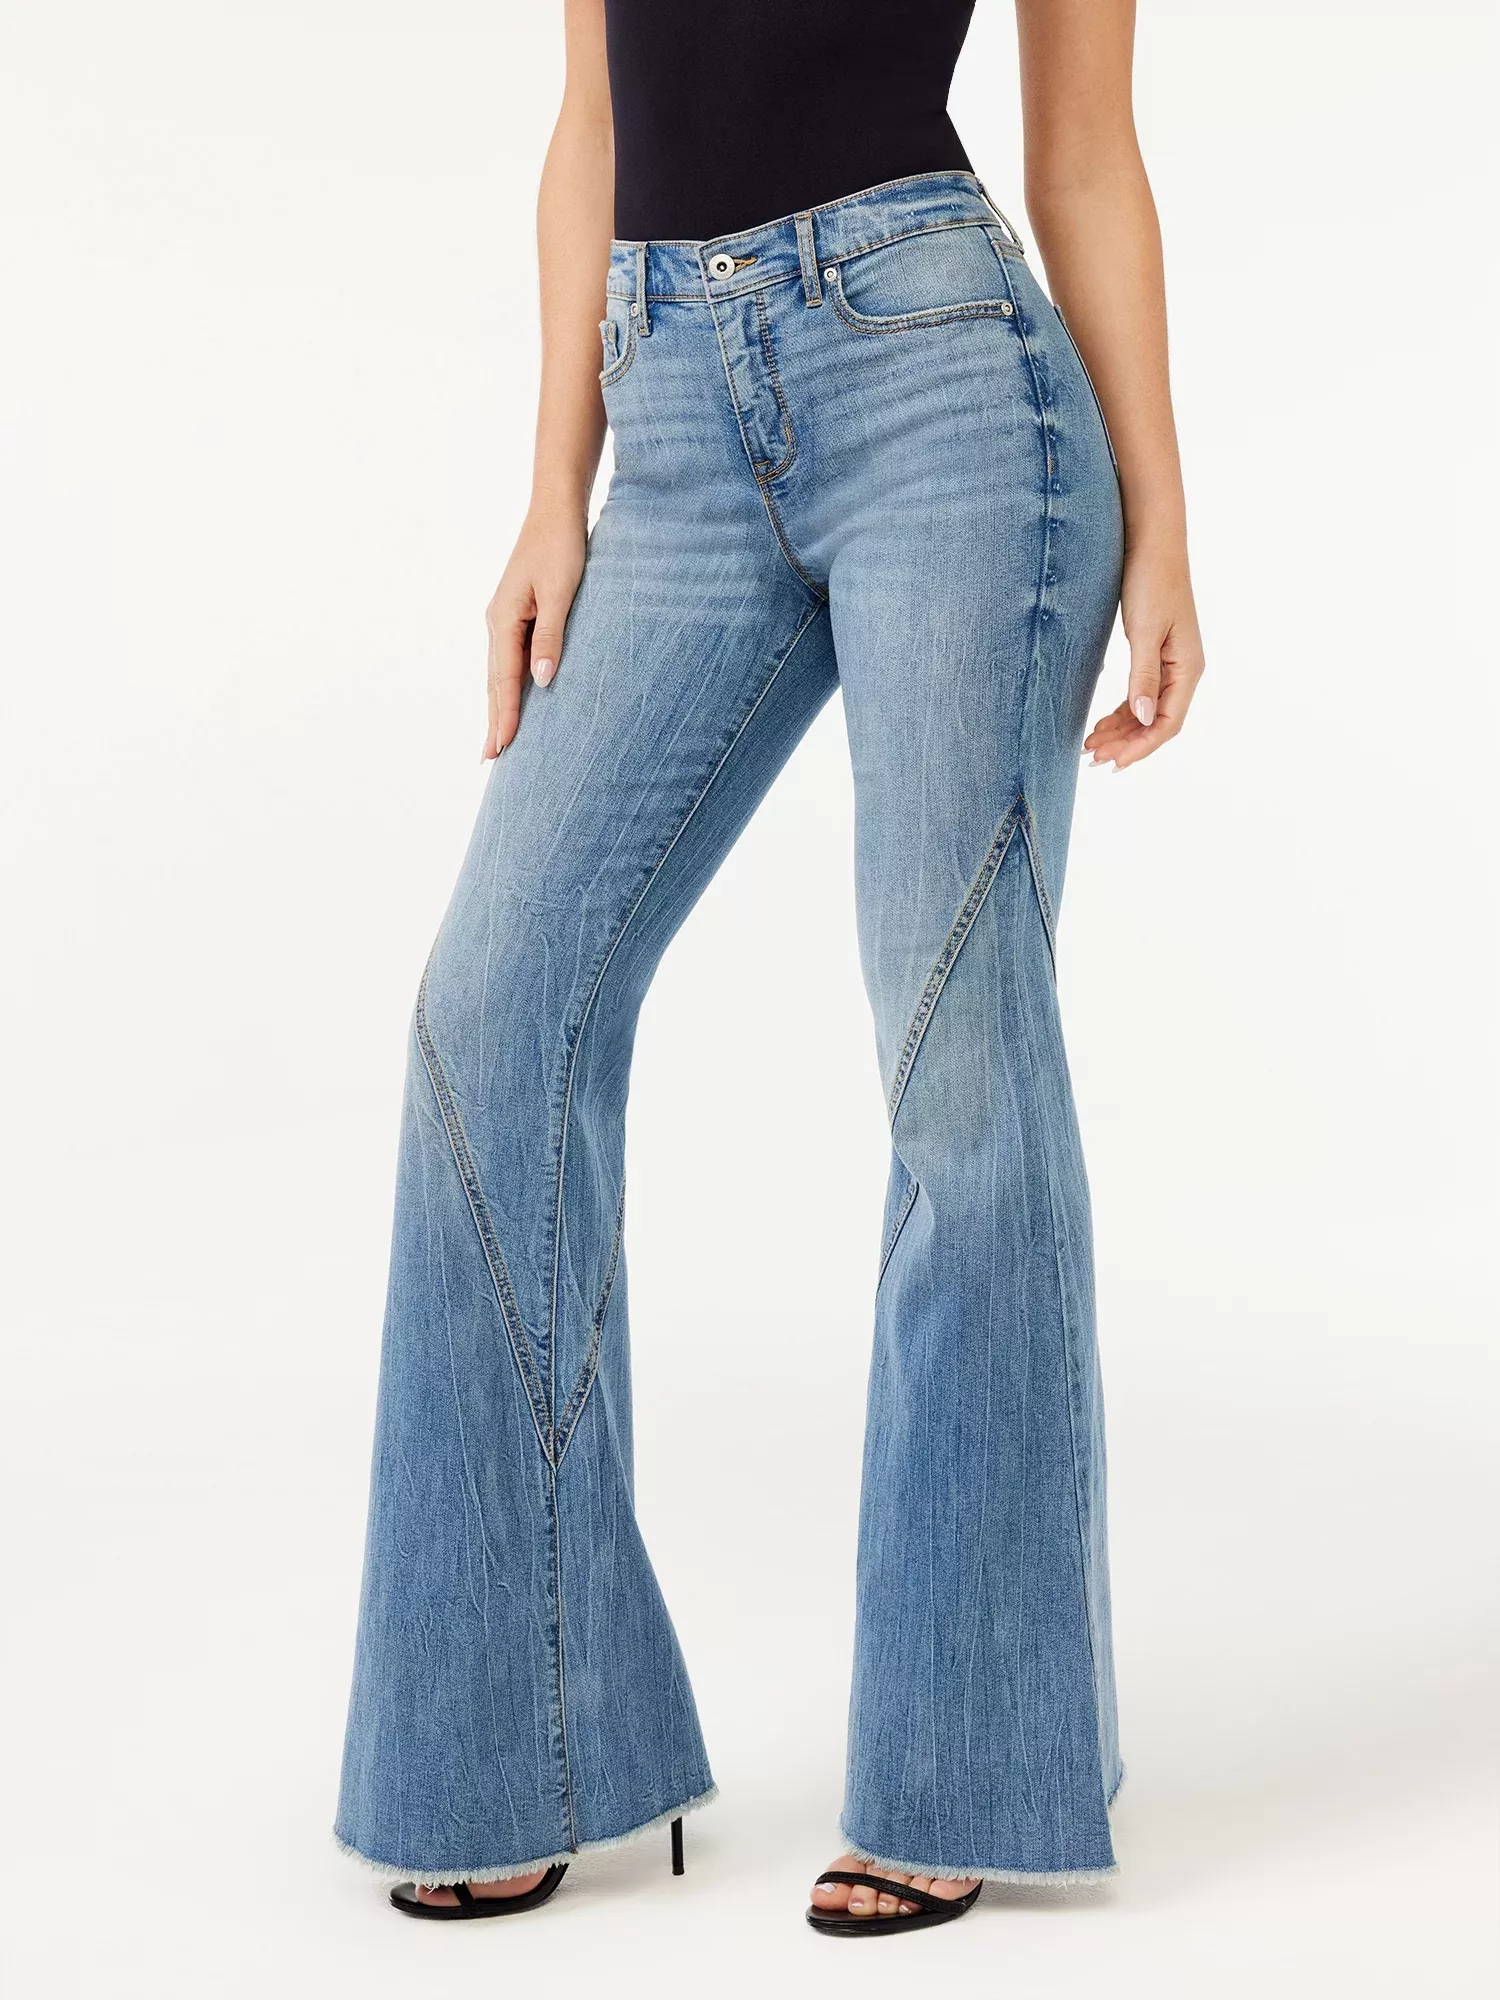 Sofia Jeans Women's Melisa High Rise Super Flare Pull On Jeans 